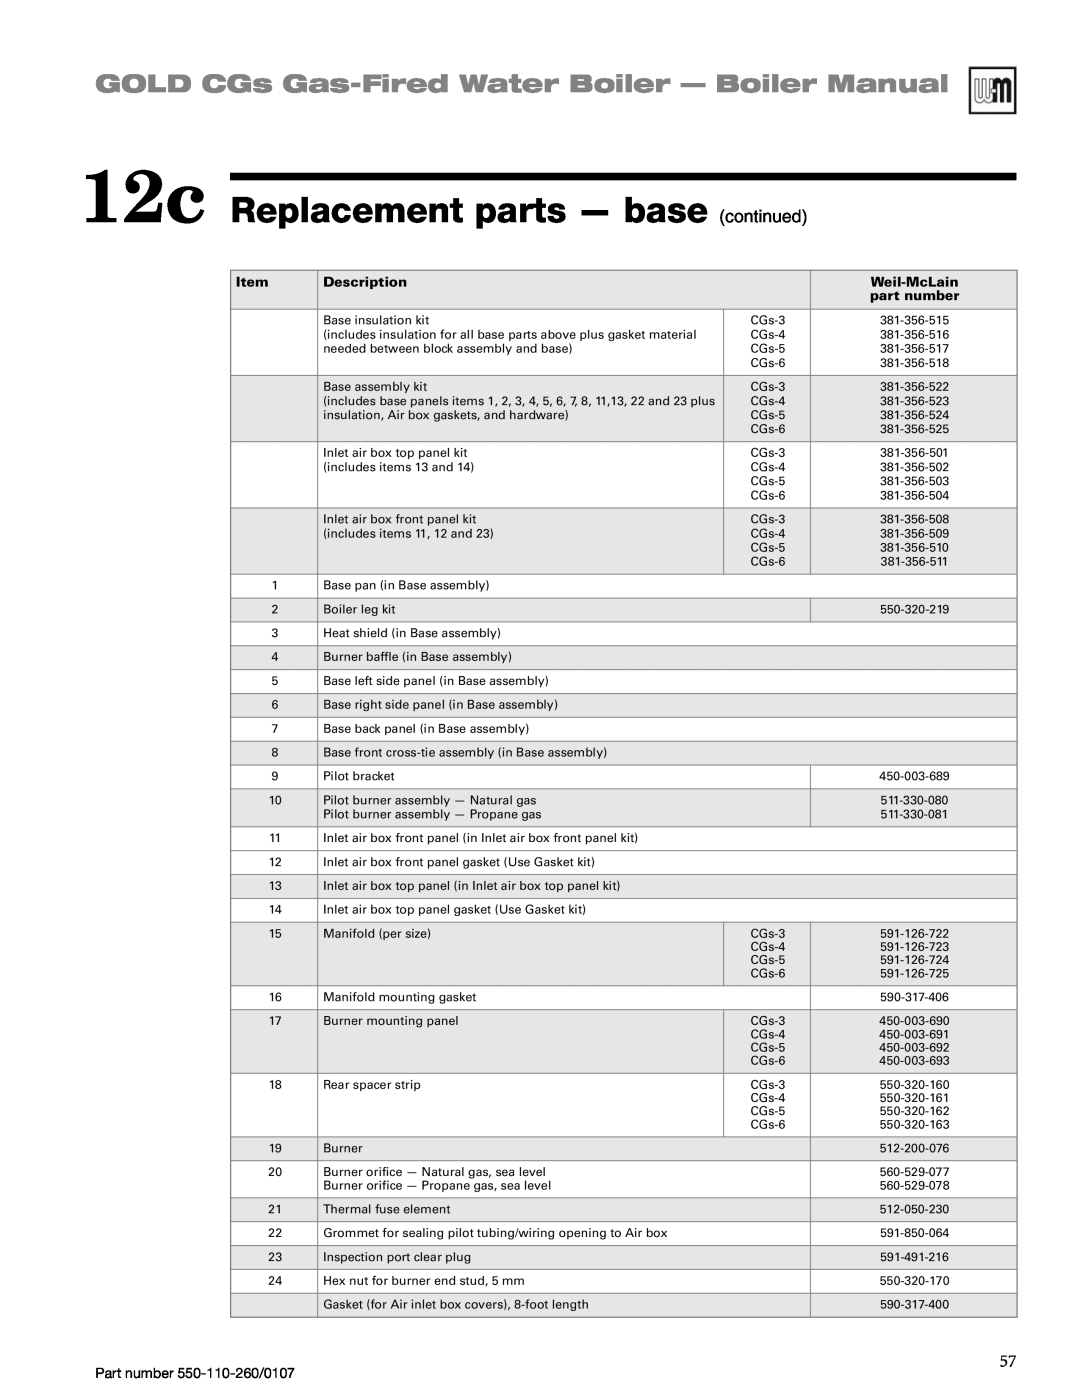 Weil-McLain 550-110-260/0107 manual 12c Replacement parts — base continued, GOLD CGs Gas-FiredWater Boiler — Boiler Manual 